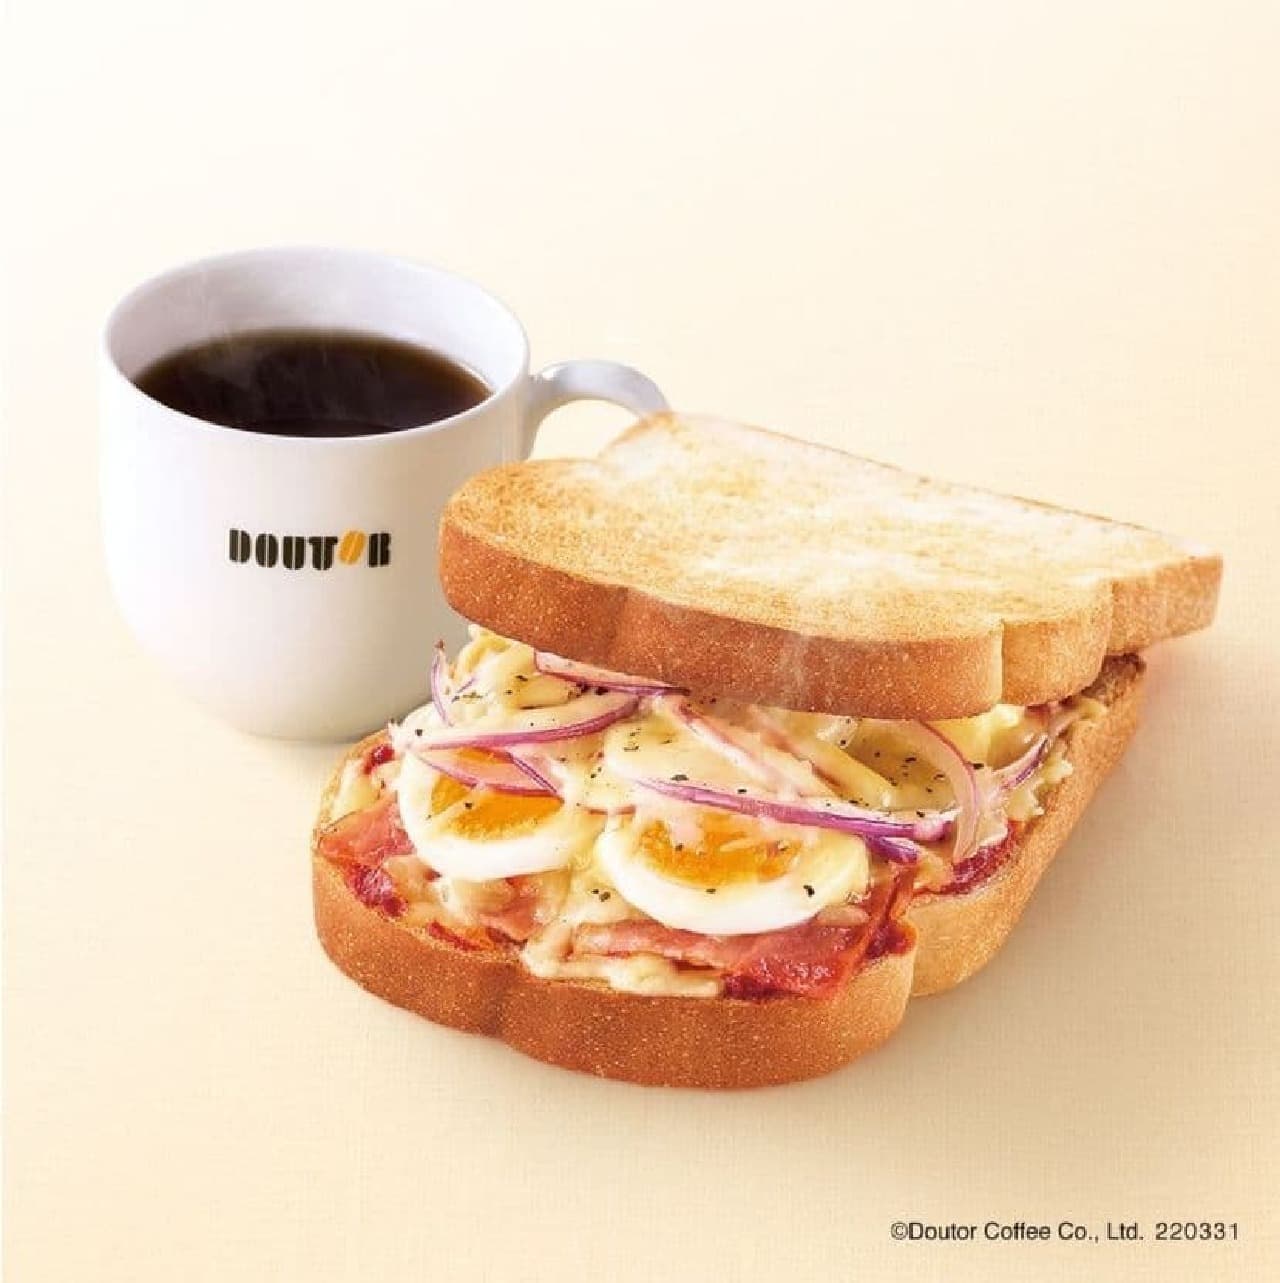 Doutor "Hot Morning Bacon & Eggs -Melting Three Kinds of Cheese